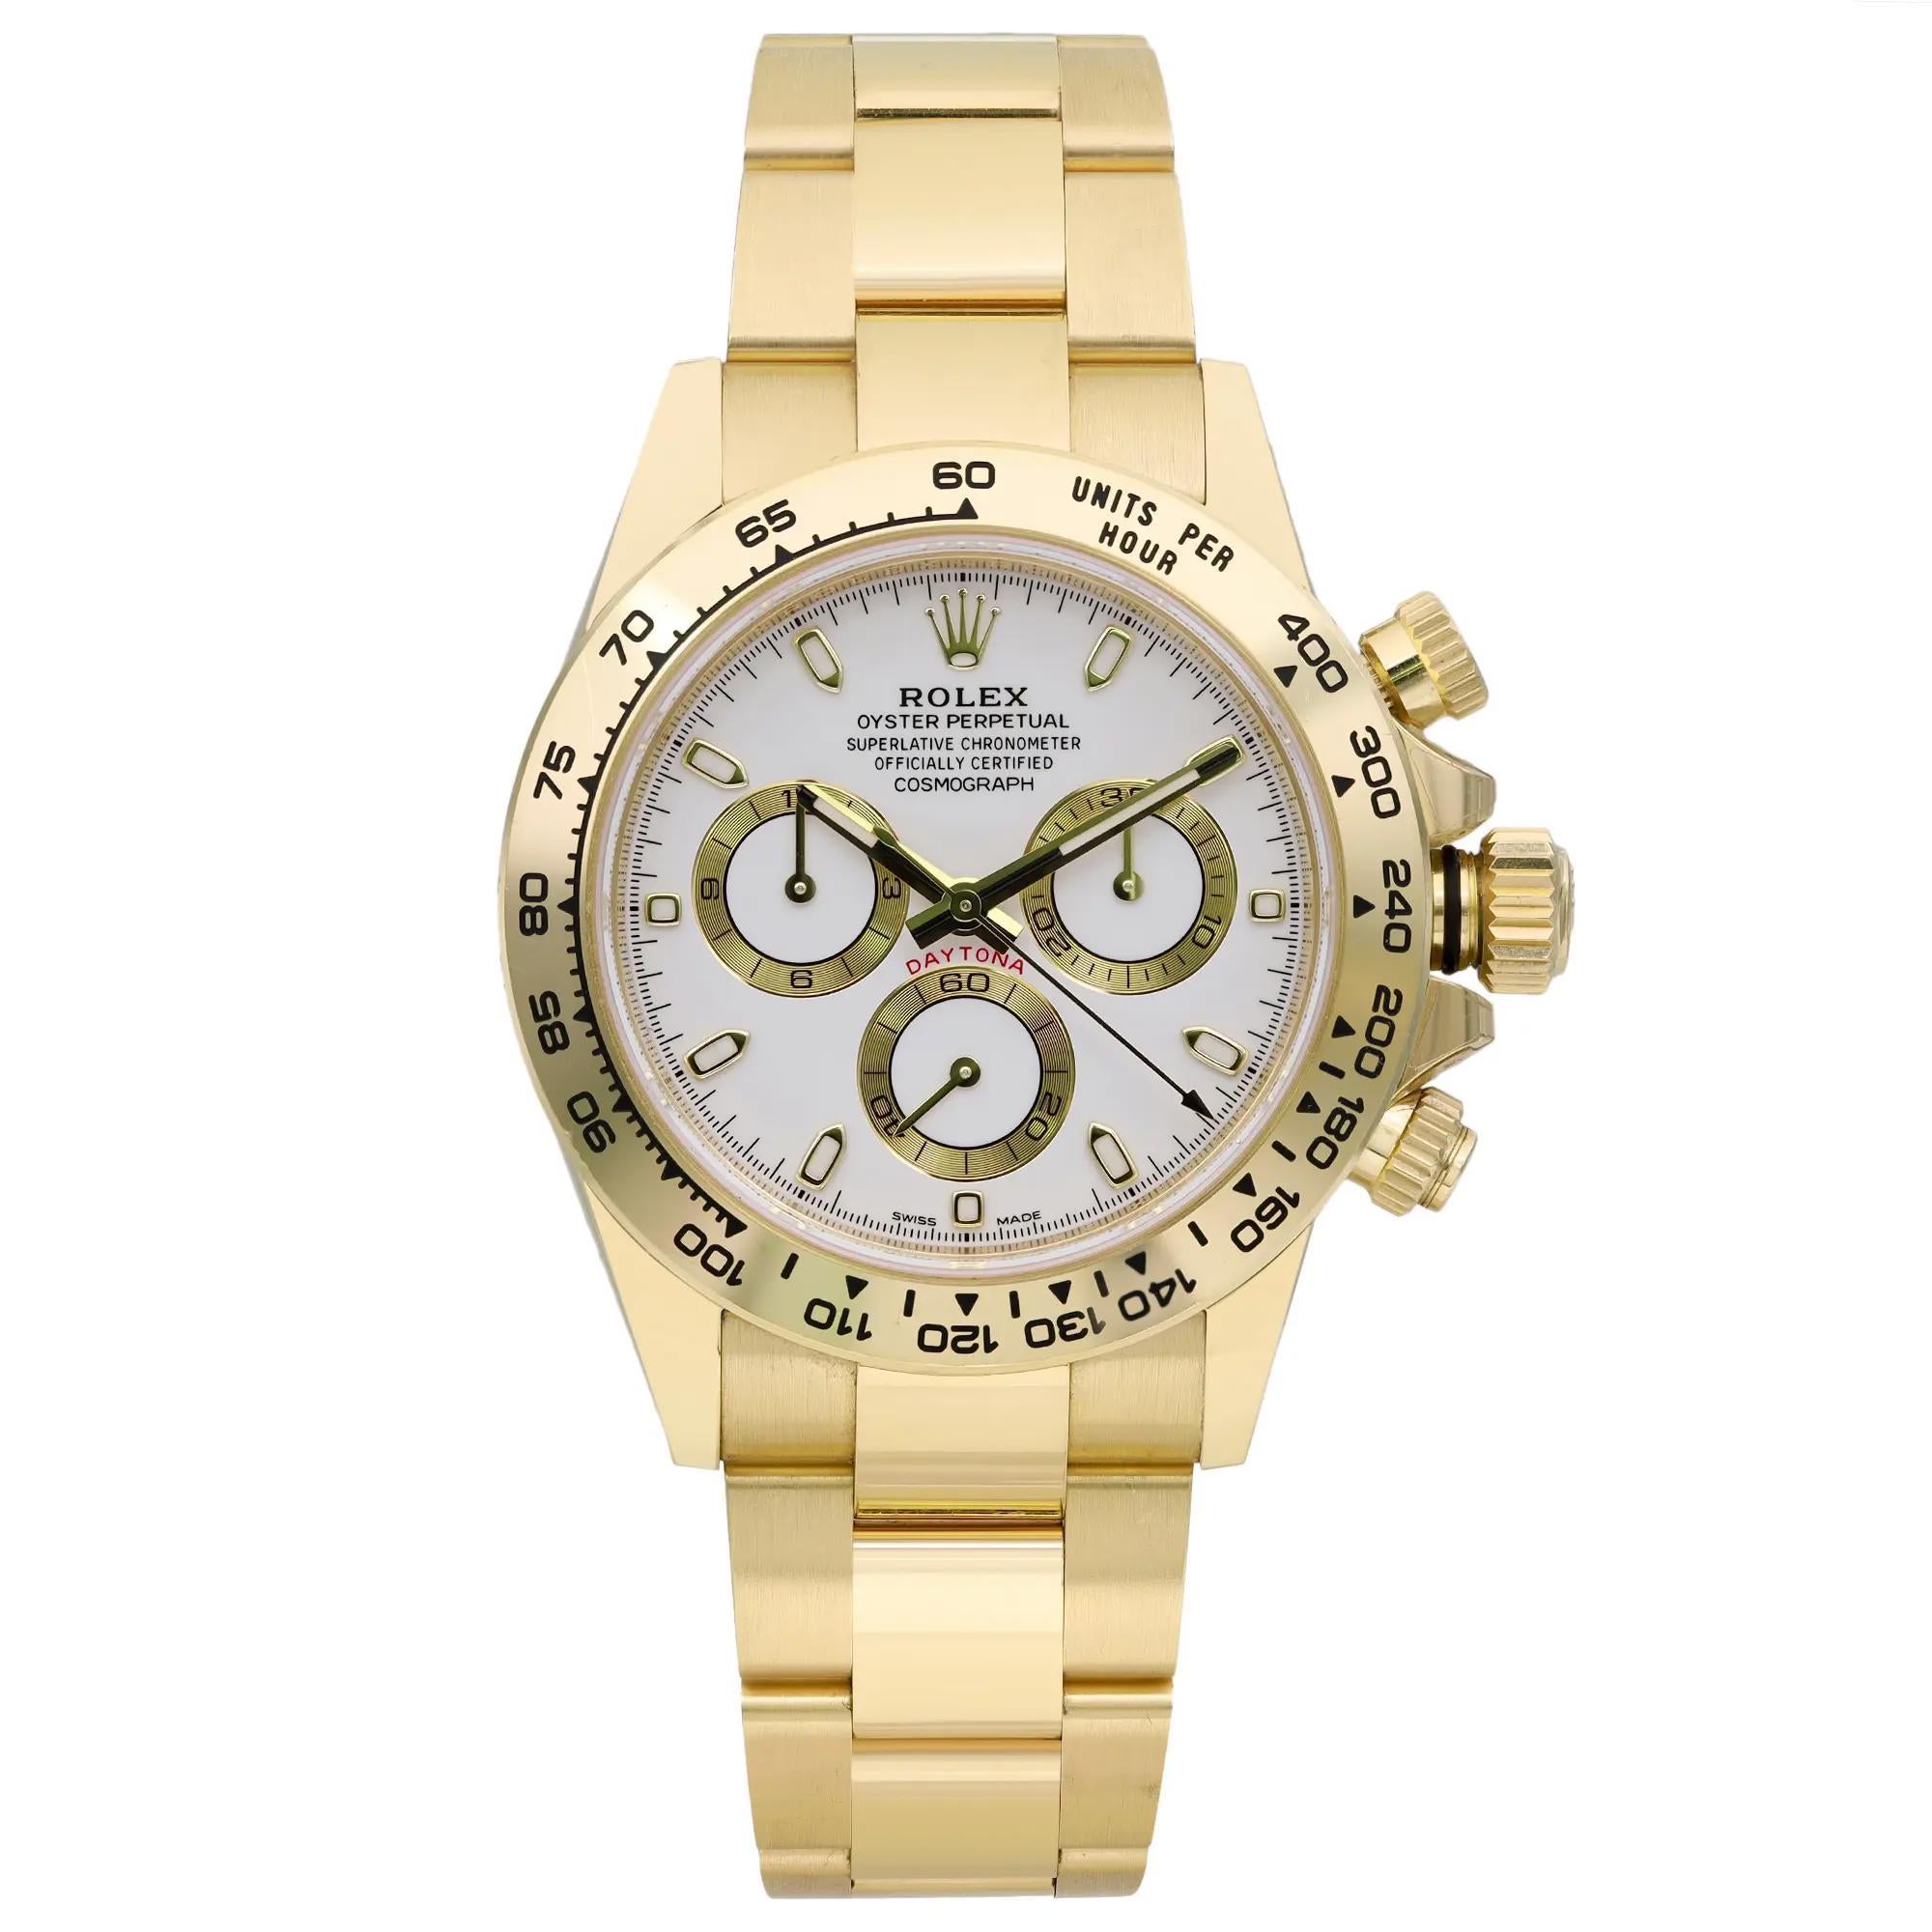 Rolex Cosmograph Daytona 18k Gold Stick White Dial Automatic Watch 116508 For Sale